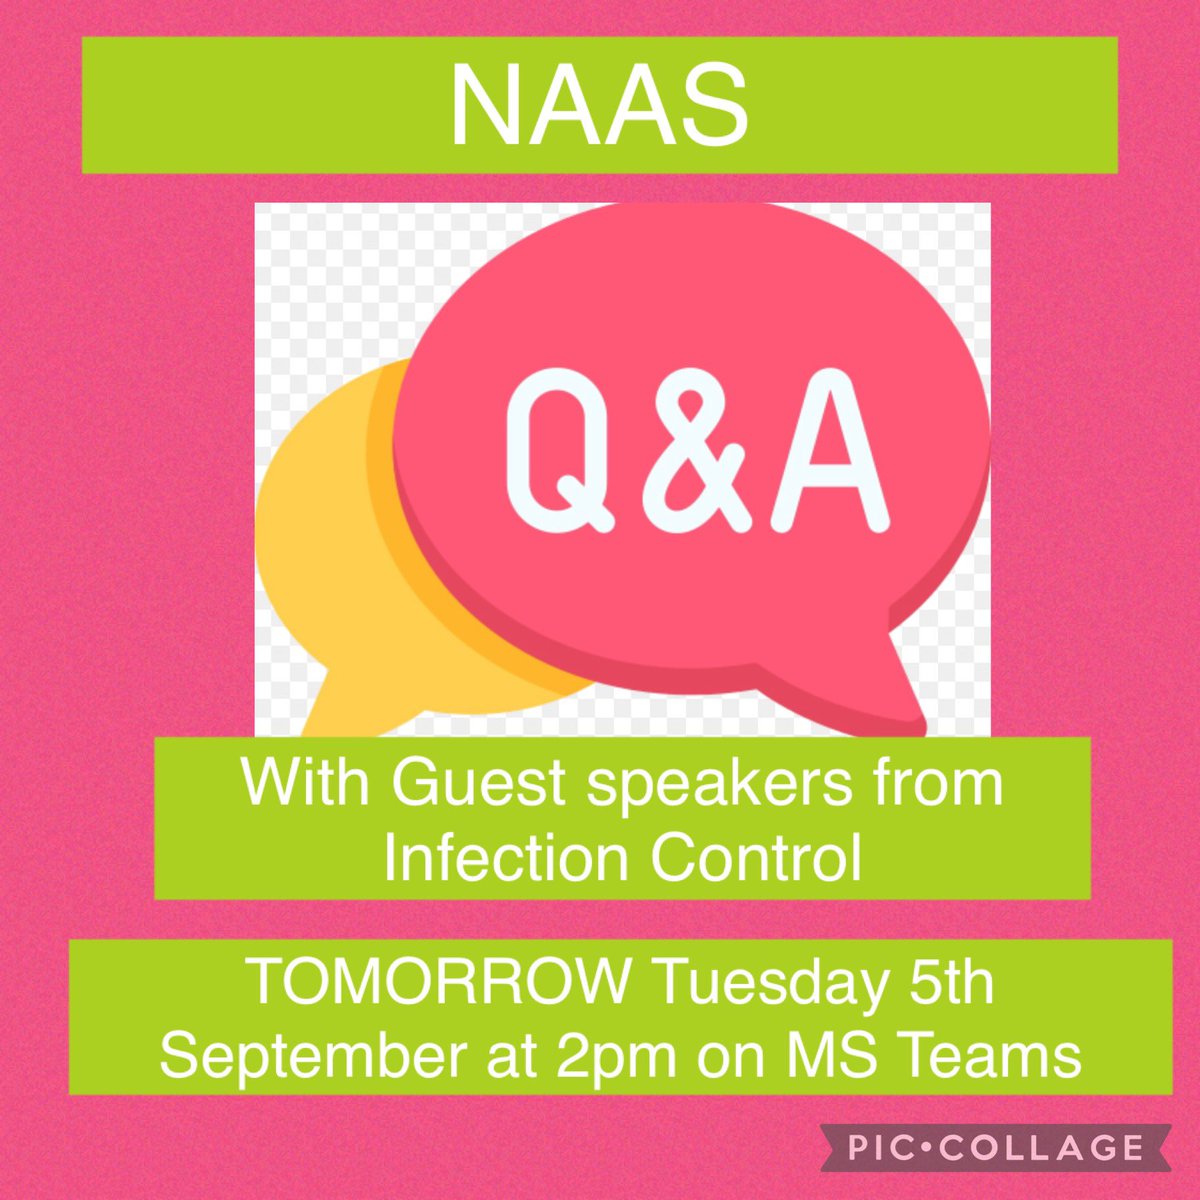 🚨TOMORROW is Septembers NAAS Q&A session🚨the topic of discussion will be Infection Control and we will be joined by the Infection Control team! Also we will be open up to any questions you may have about NAAS🤩 @JaneGarforth1 @hcarterrje @NCAlliance_NHS @VickT75 @jacqui_burrow